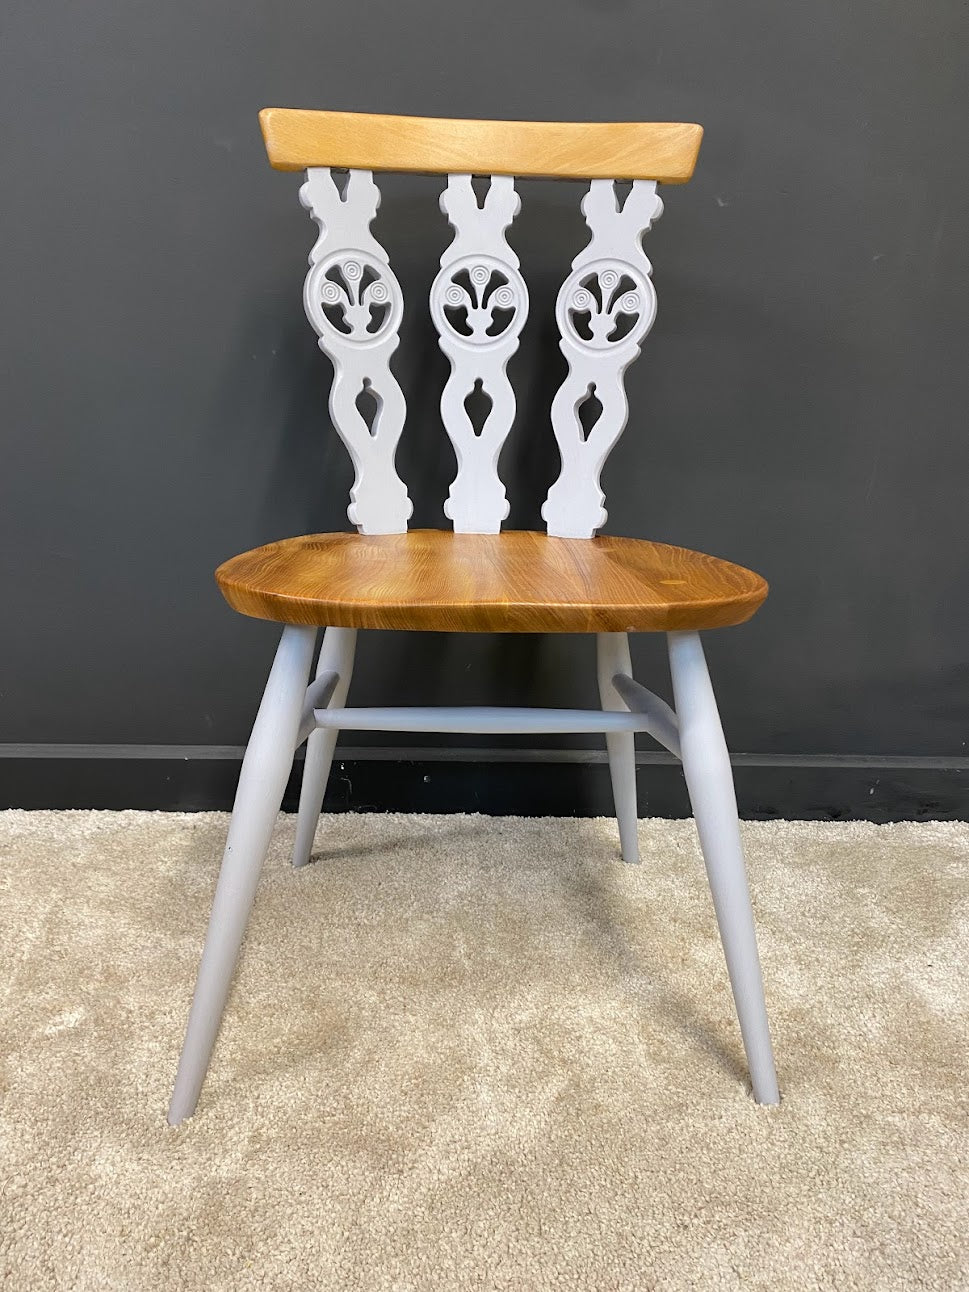 Vintage Ercol Dining Table and 4 Fleur de Lys Chairs